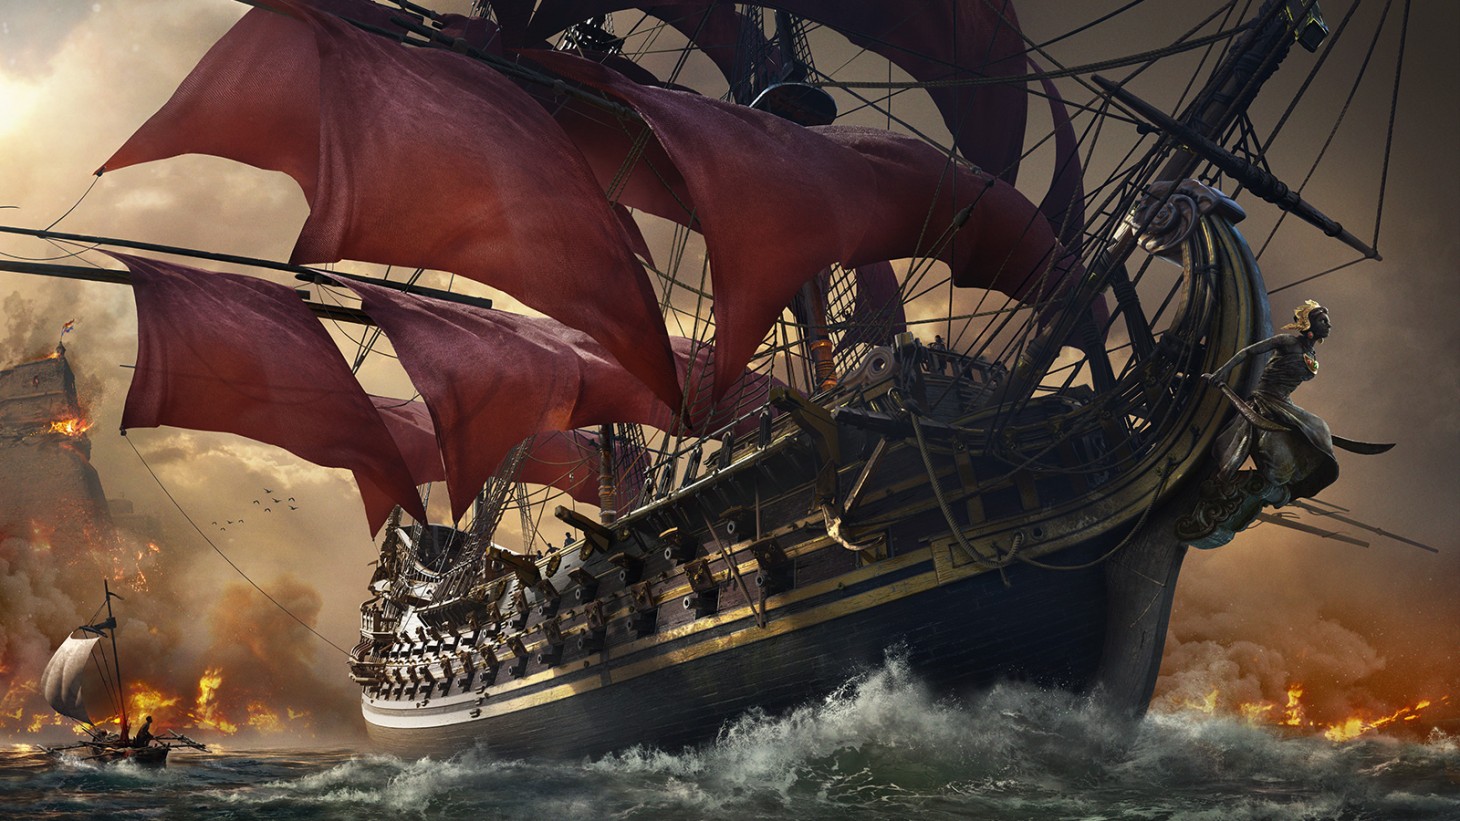 Skull and Bones receives another release date after years of delays